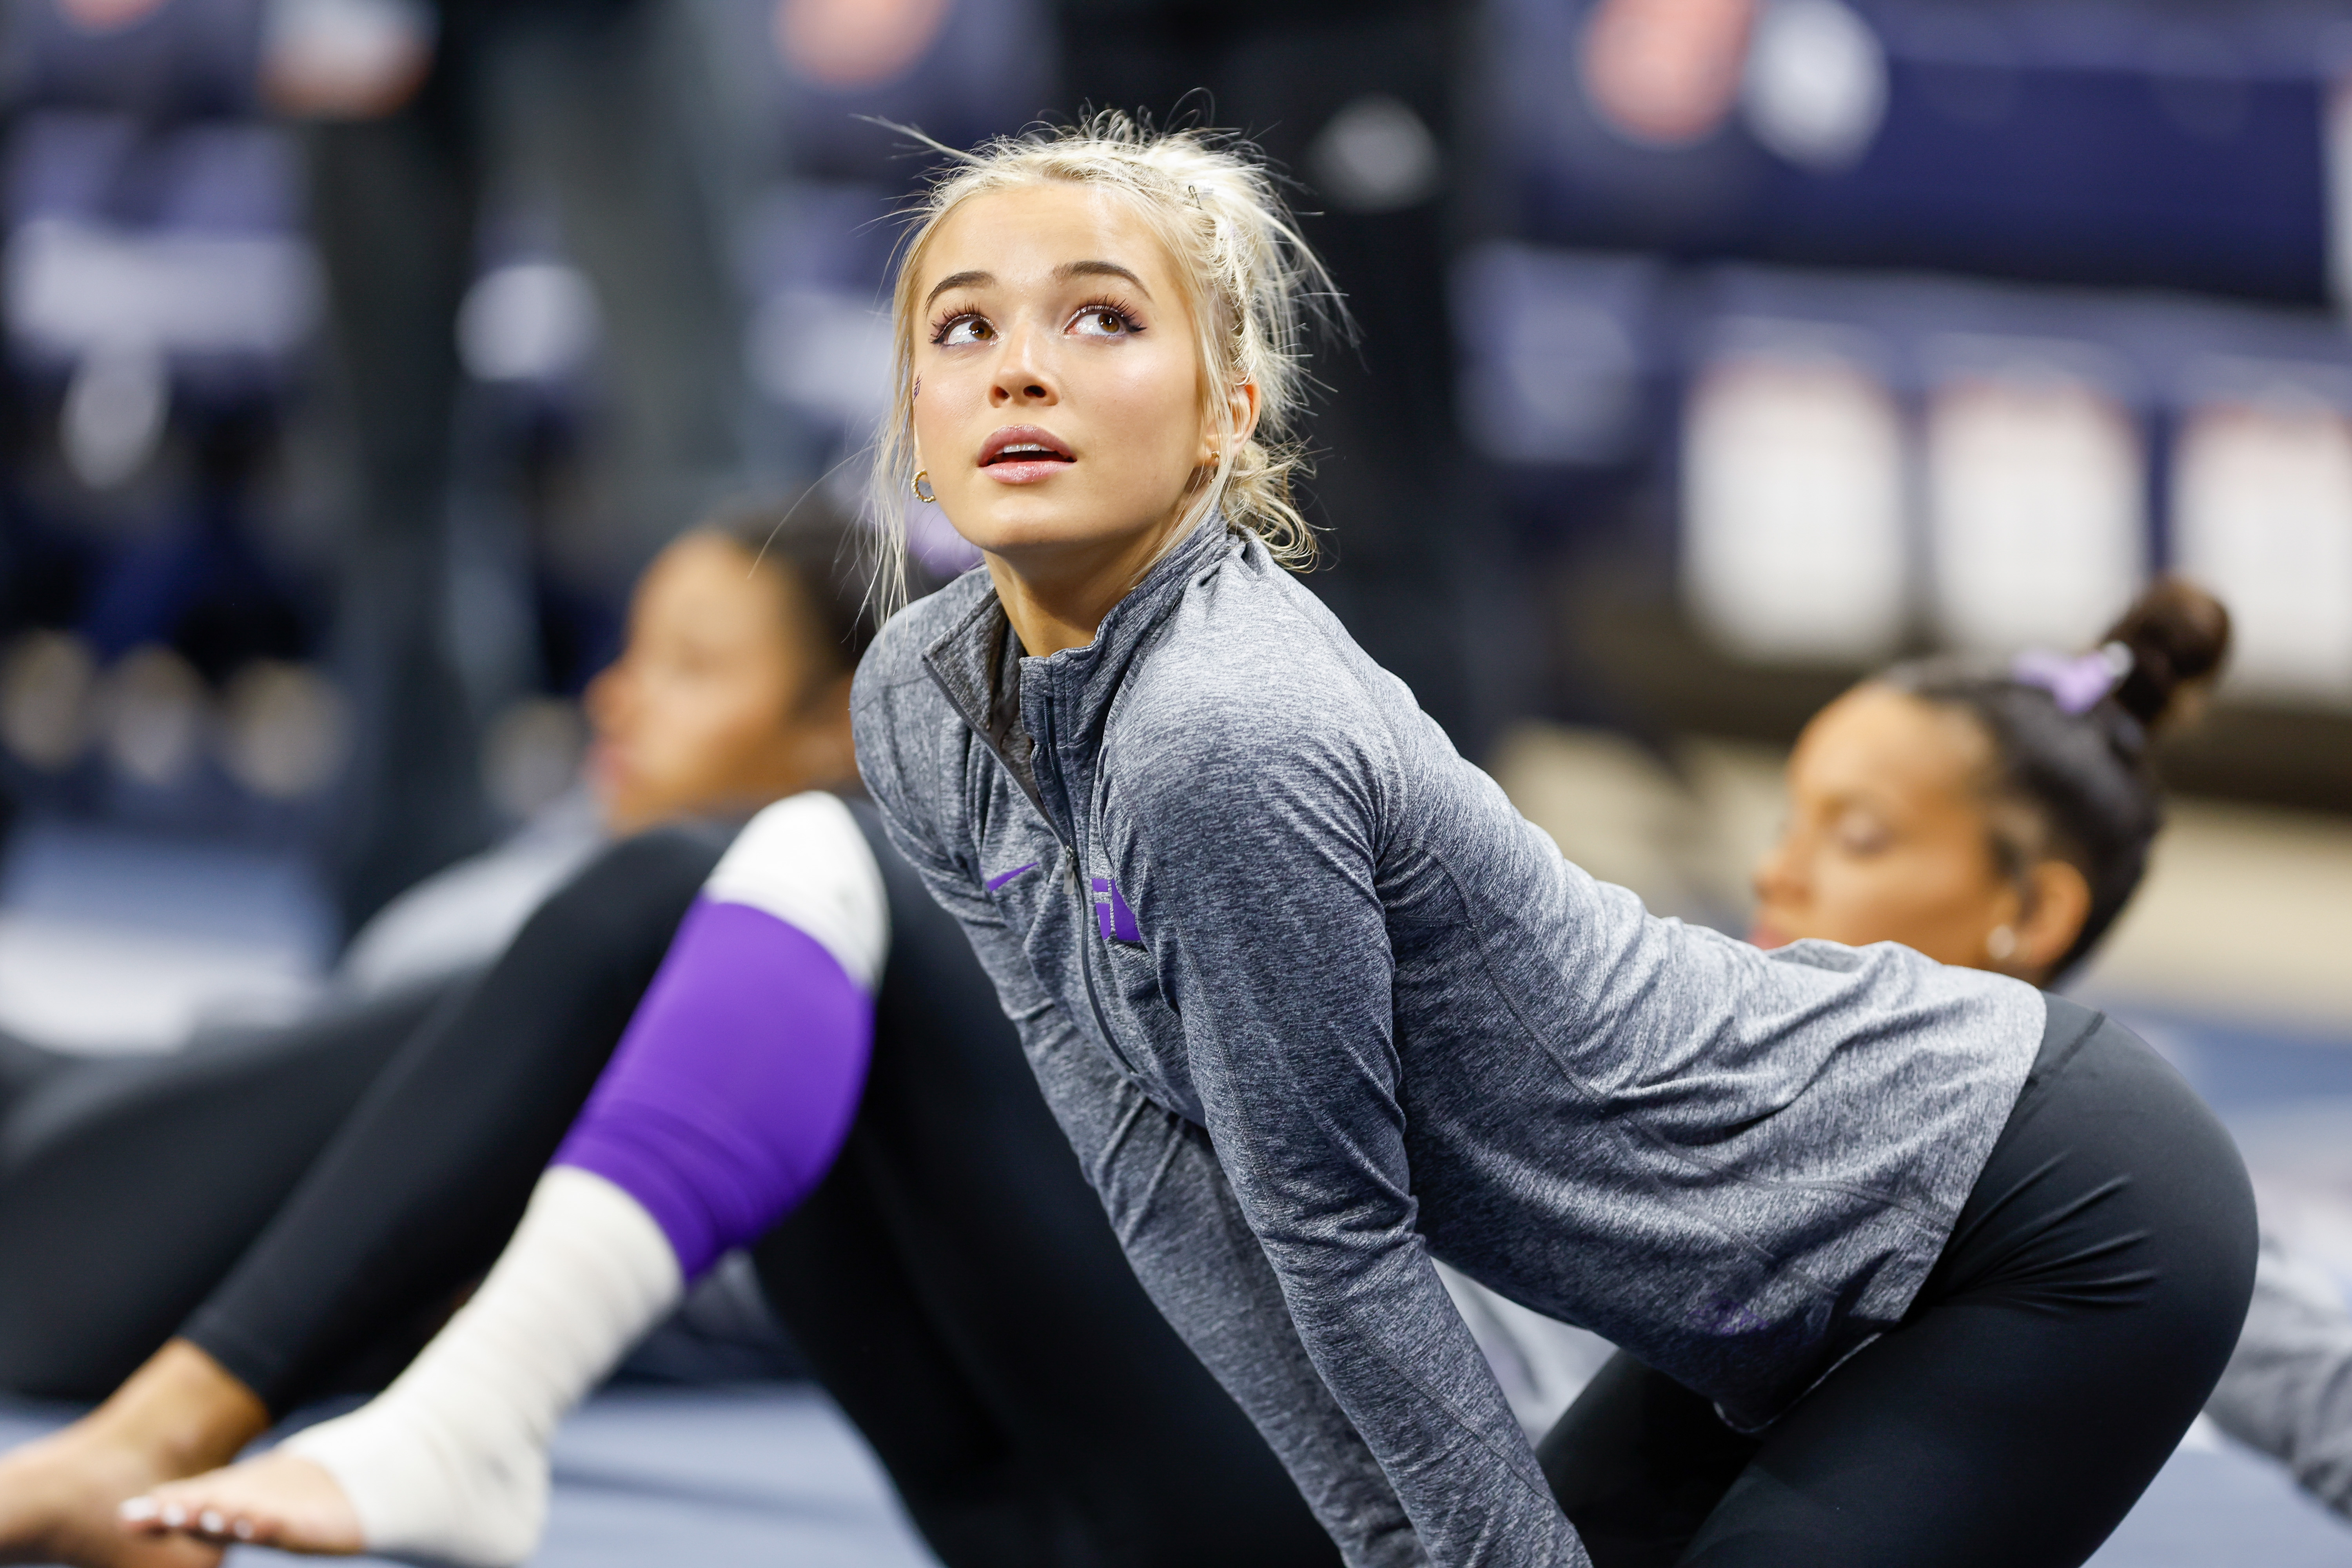 The 21-year-old is in her senior season as an LSU gymnast